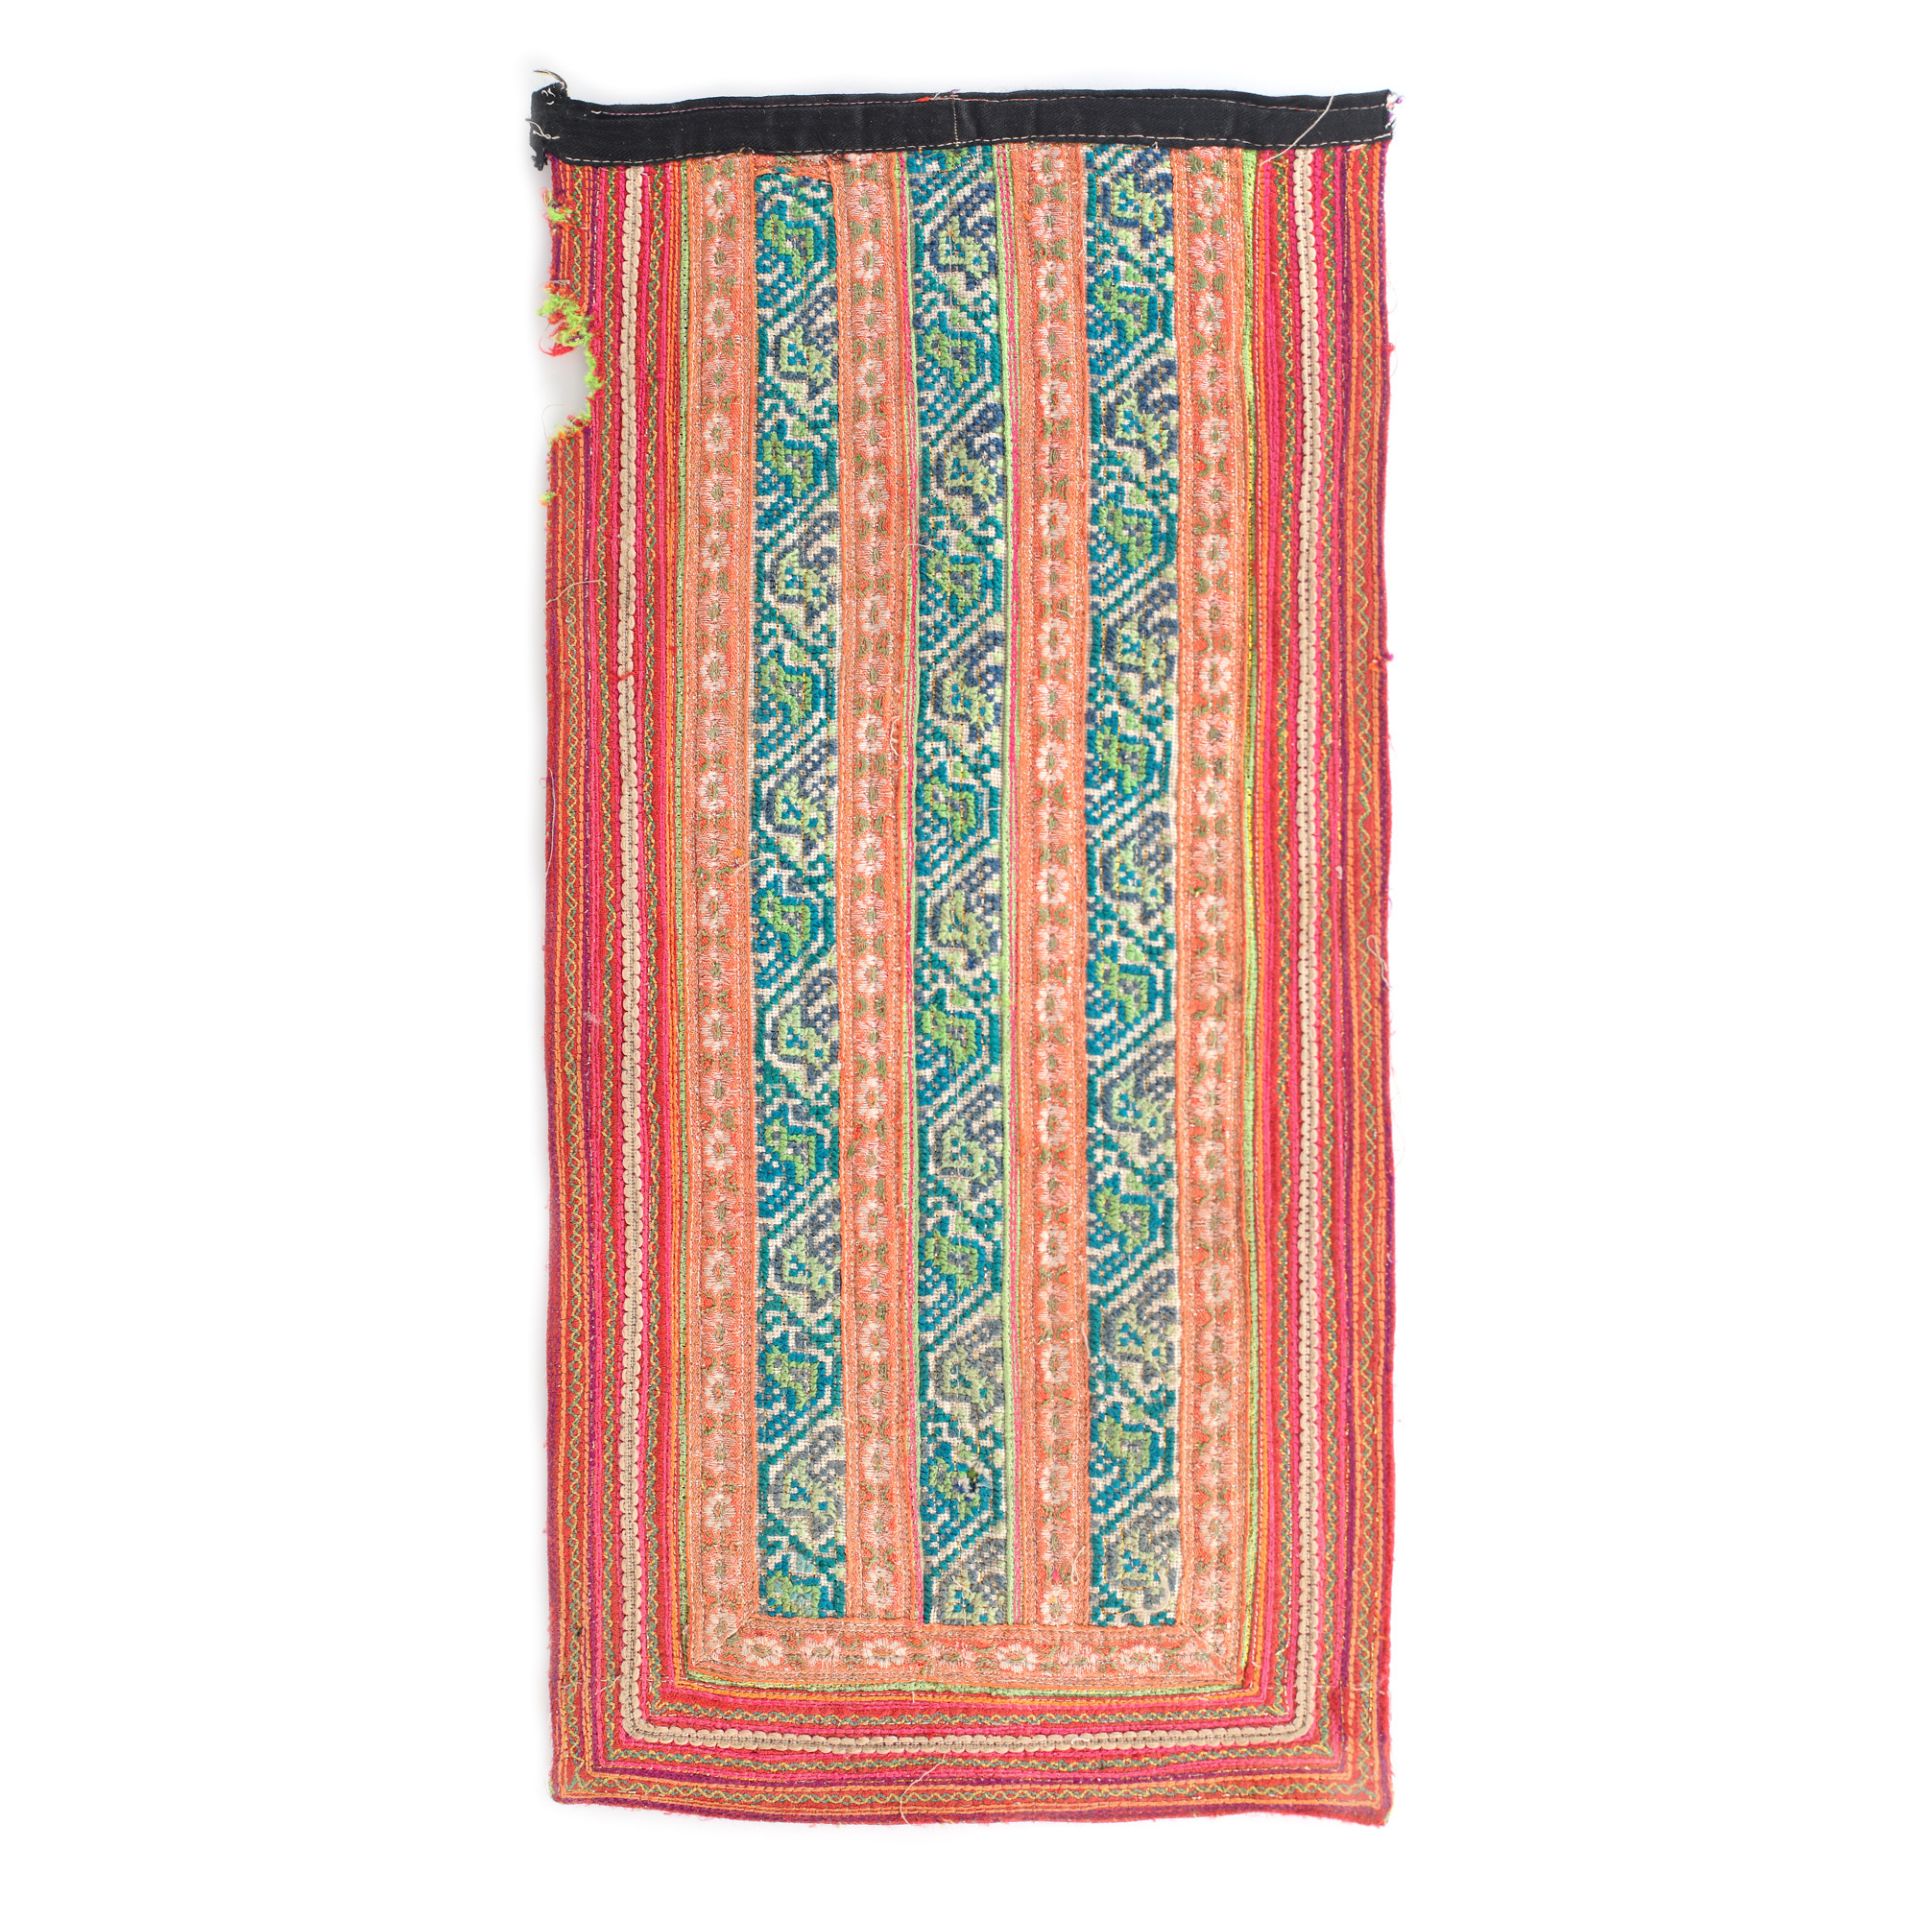 Mentsi Martha - wool fabric, possibly part of a traditional costume, Bhutan, early 20th century